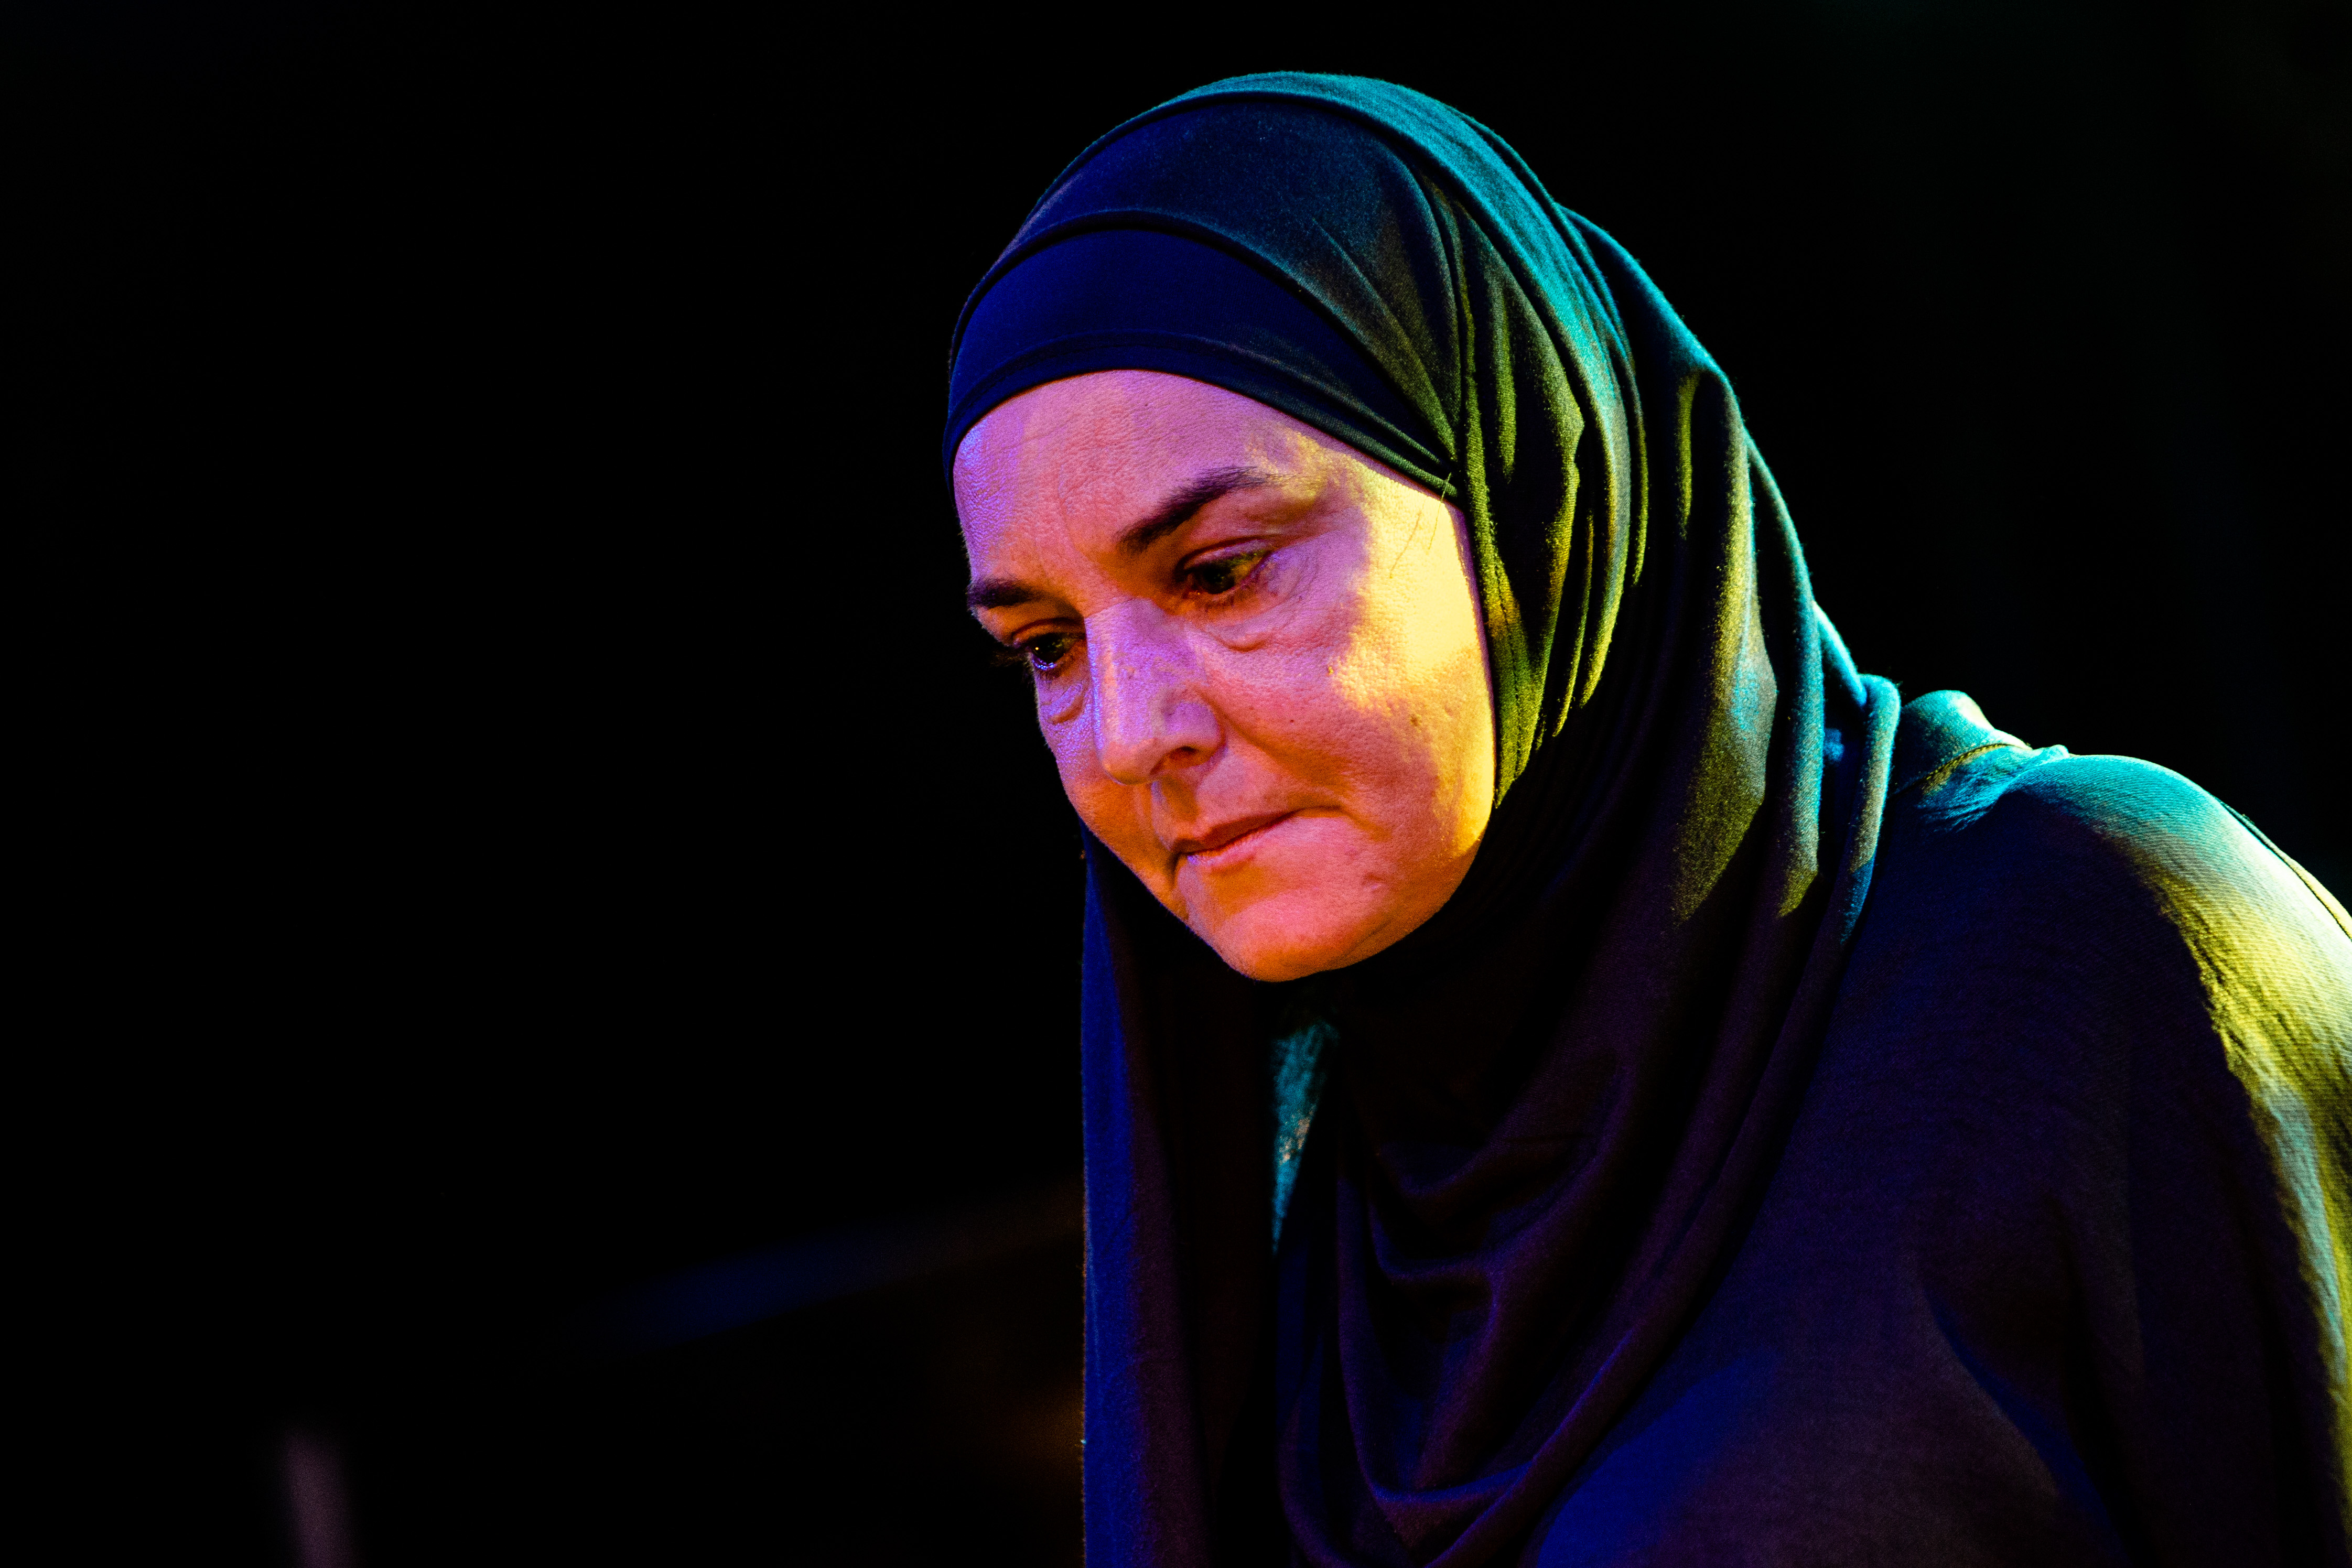 Sinead O'Connor performs live at Campus Industry Music in Parma, Italy, on January 18 2020. | Source: Getty Images